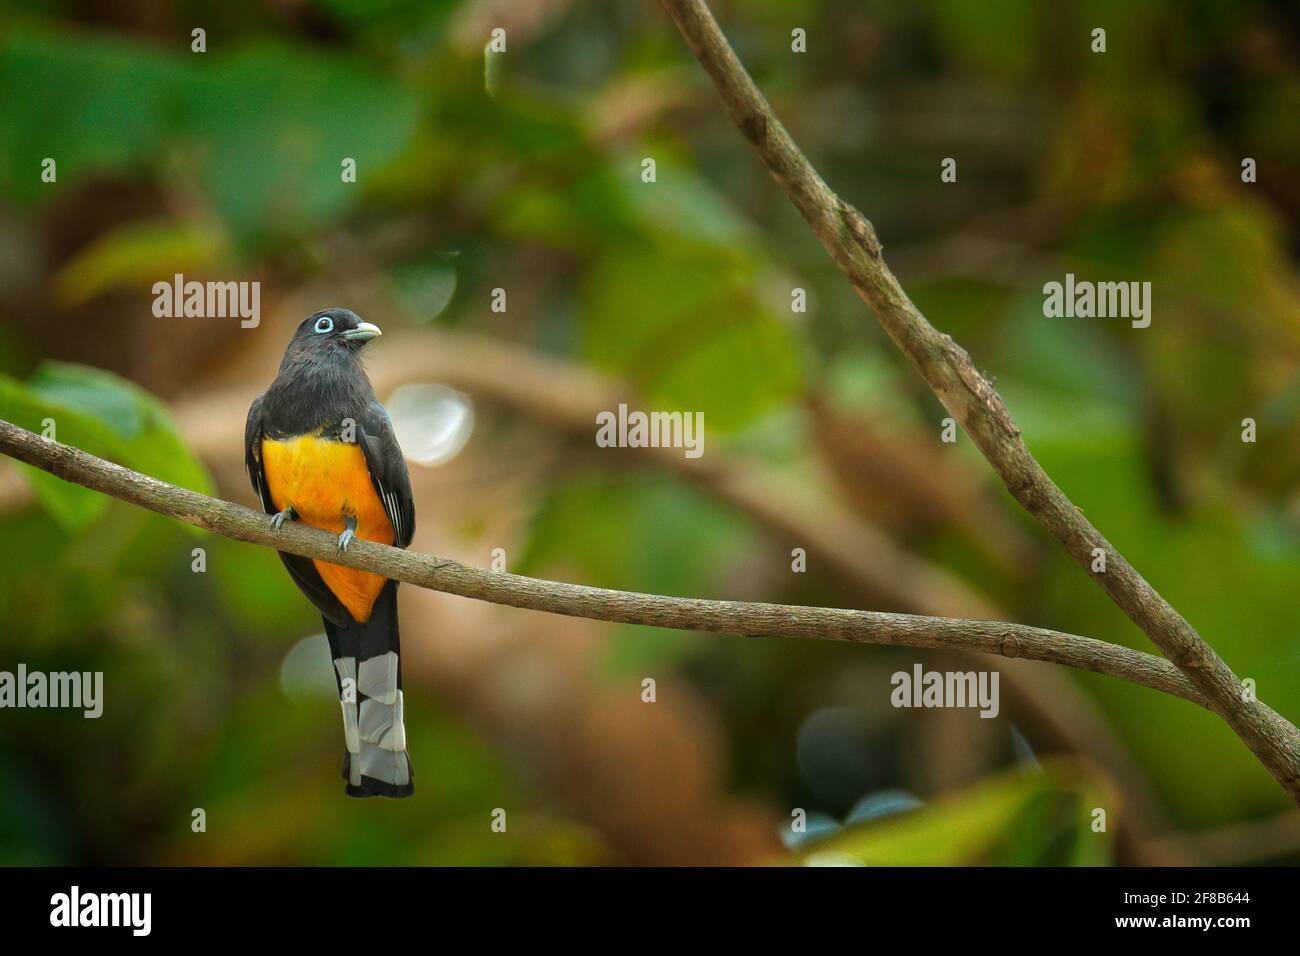 Black-headed trogon, Trogon melanocephalus, yellow and dark blue exotic tropical bird sitting on thin branch in the forest, Carara NP, Costa Rica. Wil Stock Photo